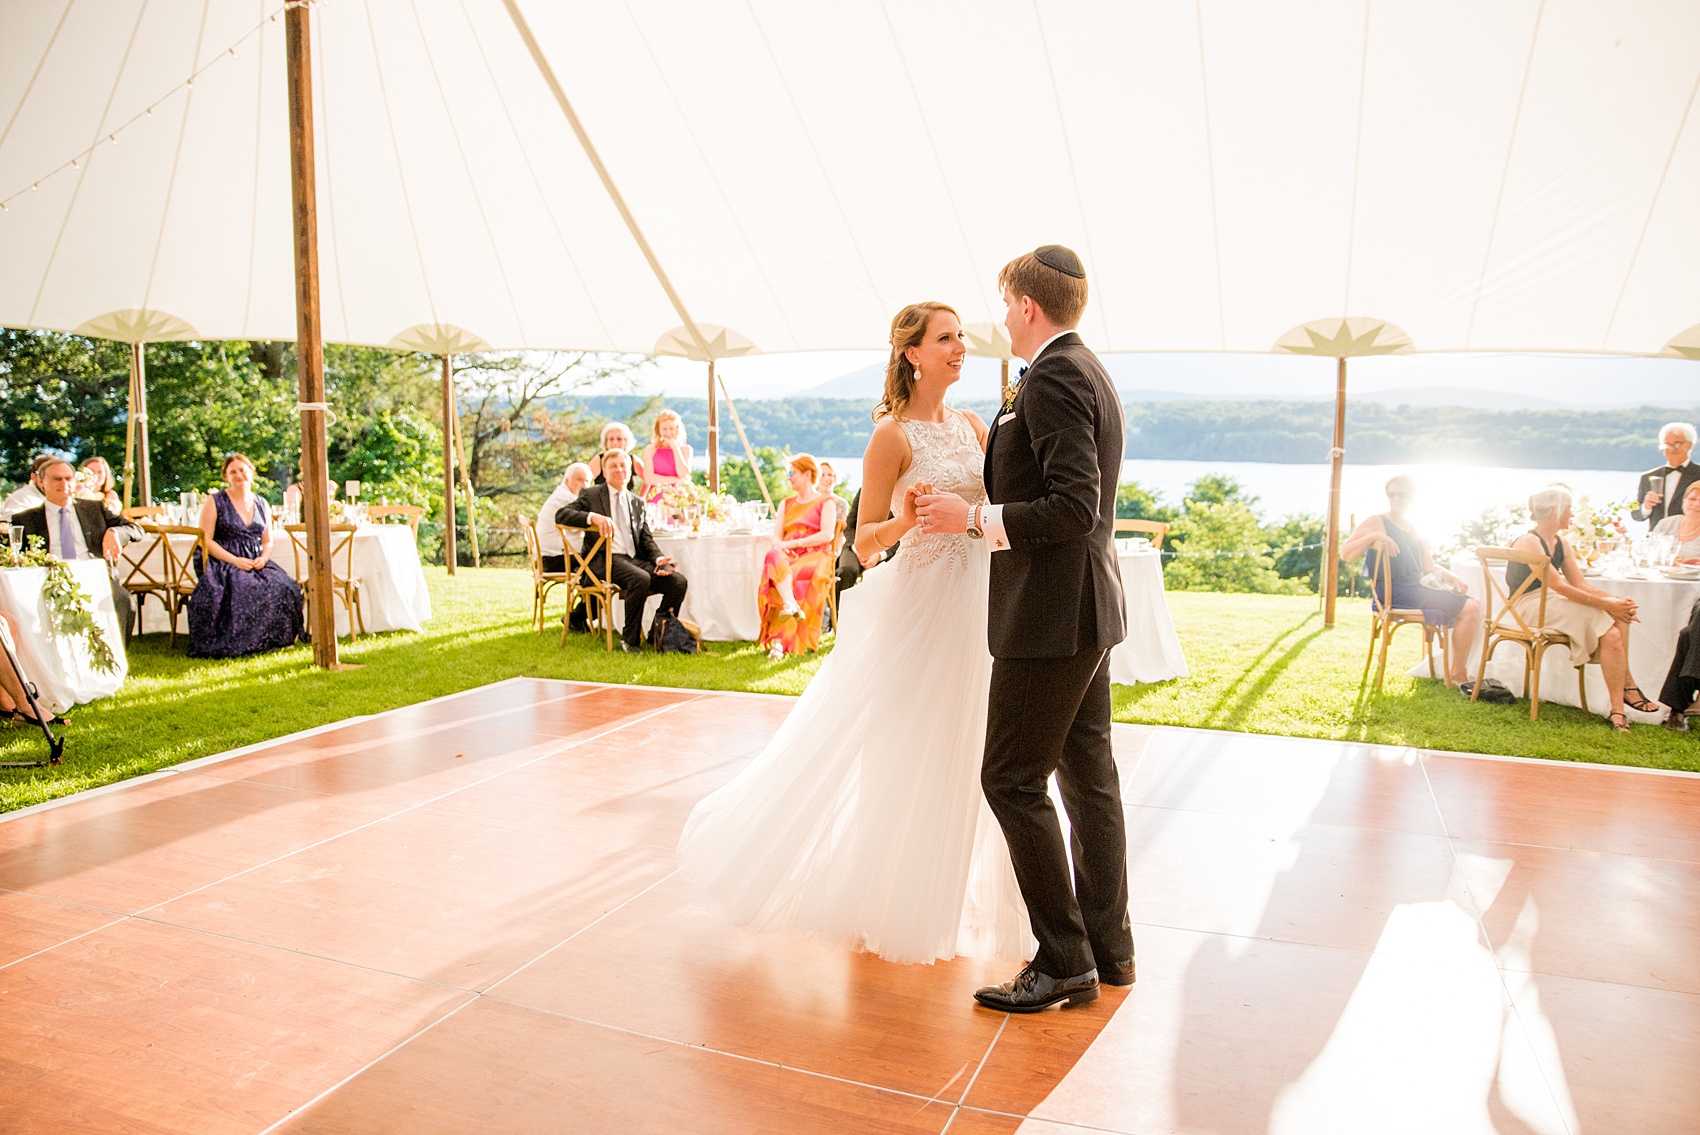 Mikkel Paige Photography photos from a Southwood Estate Wedding in Germantown, New York in the Hudson Valley. Picture of the bride and groom's first dance in their tented reception.